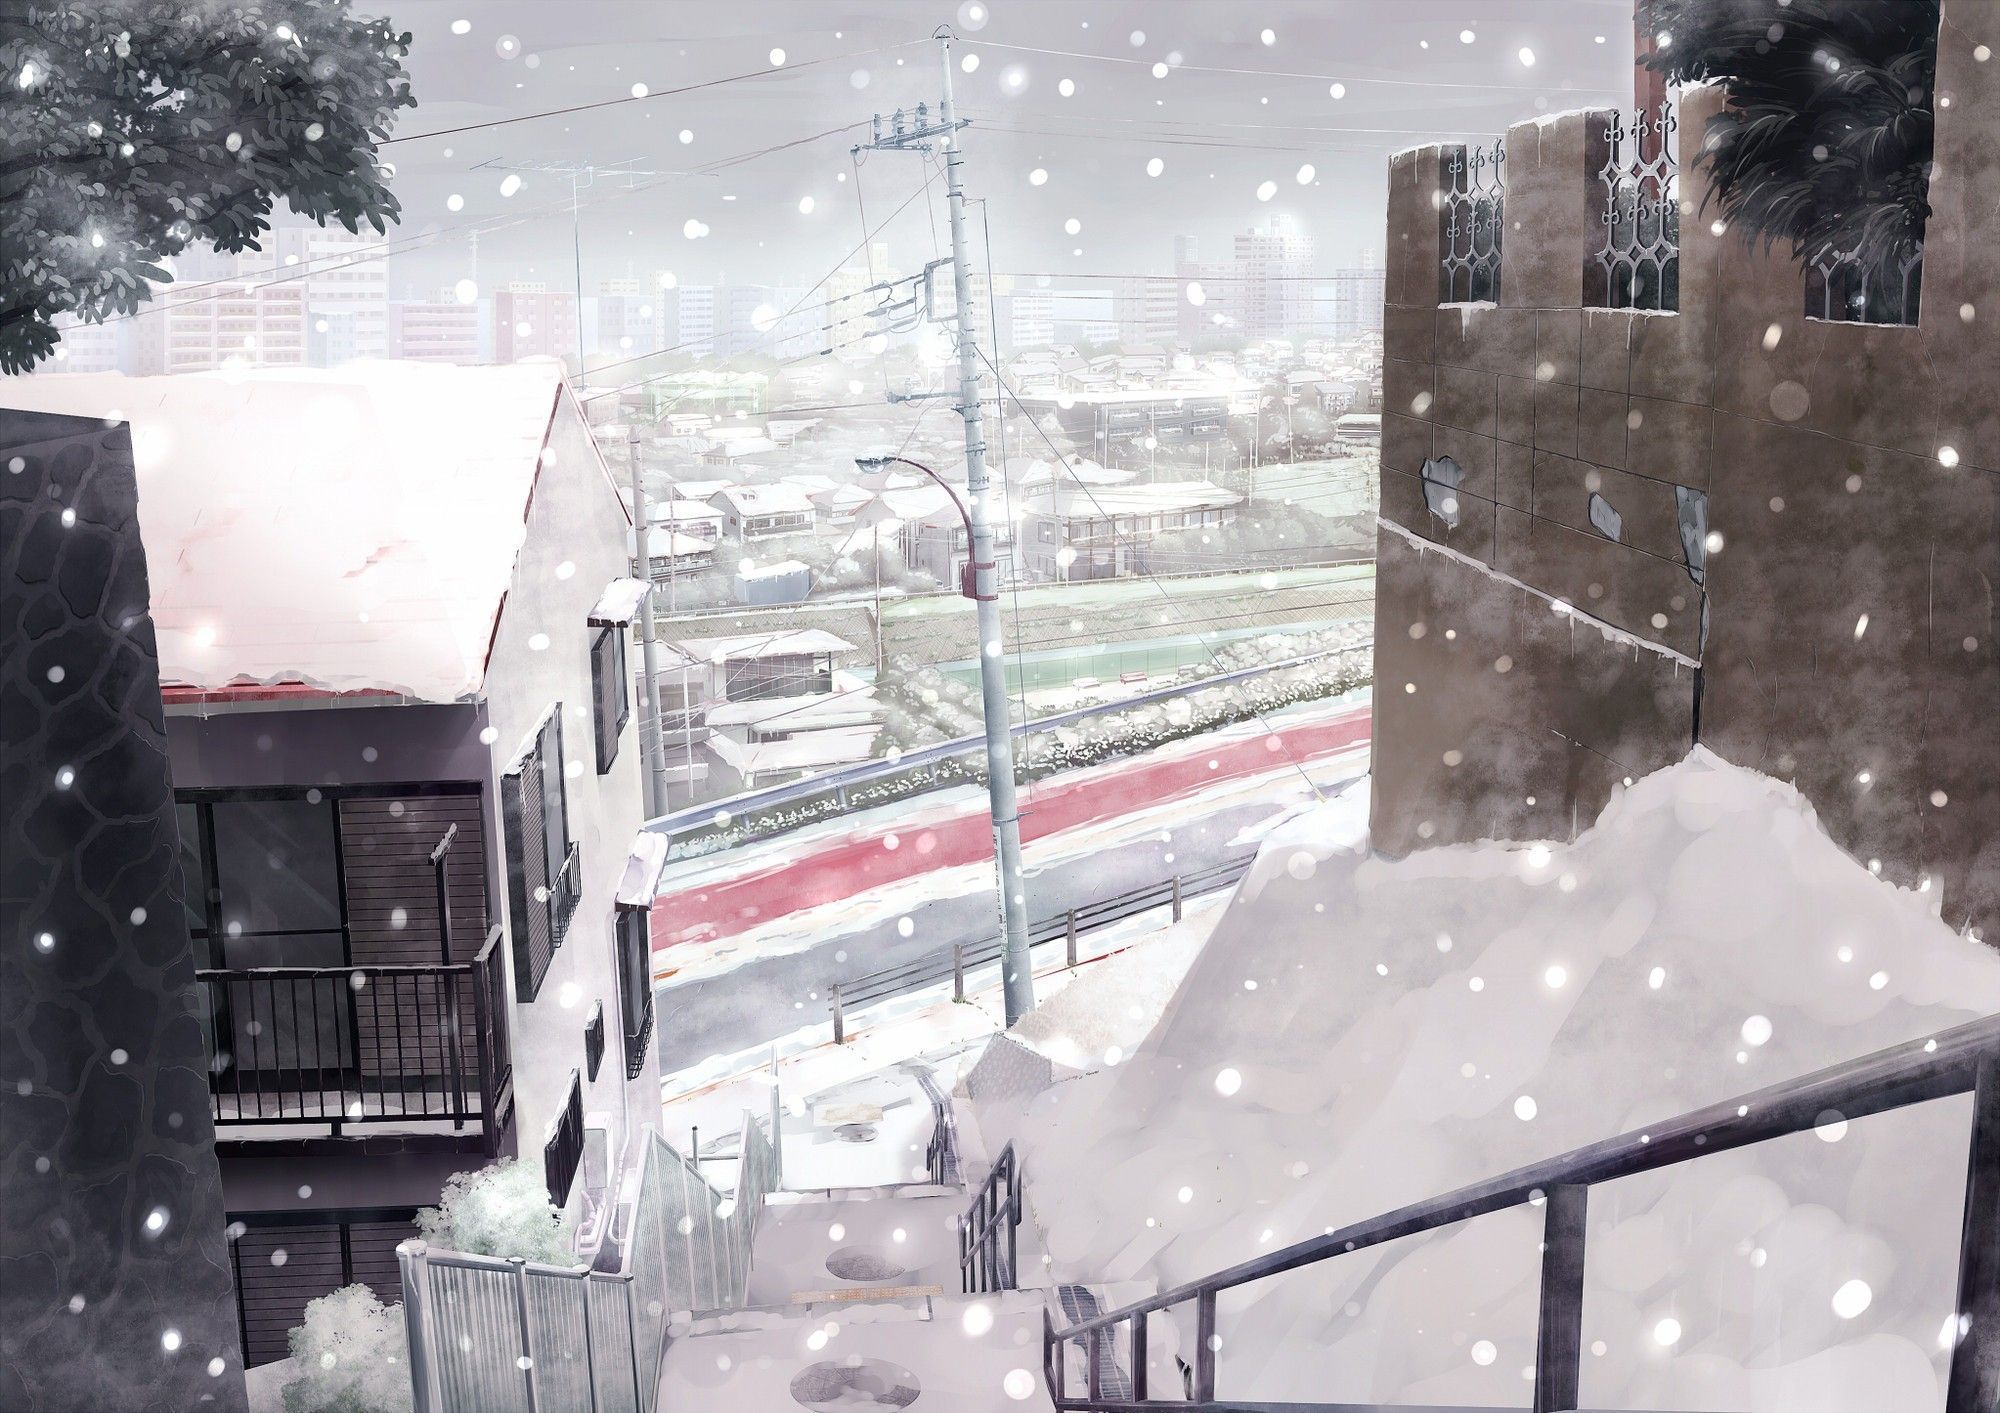 cityscape #wallpaper #stairs #winter #anime #city #snow wallpaper. Anime snow, Winter wallpaper, Anime scenery